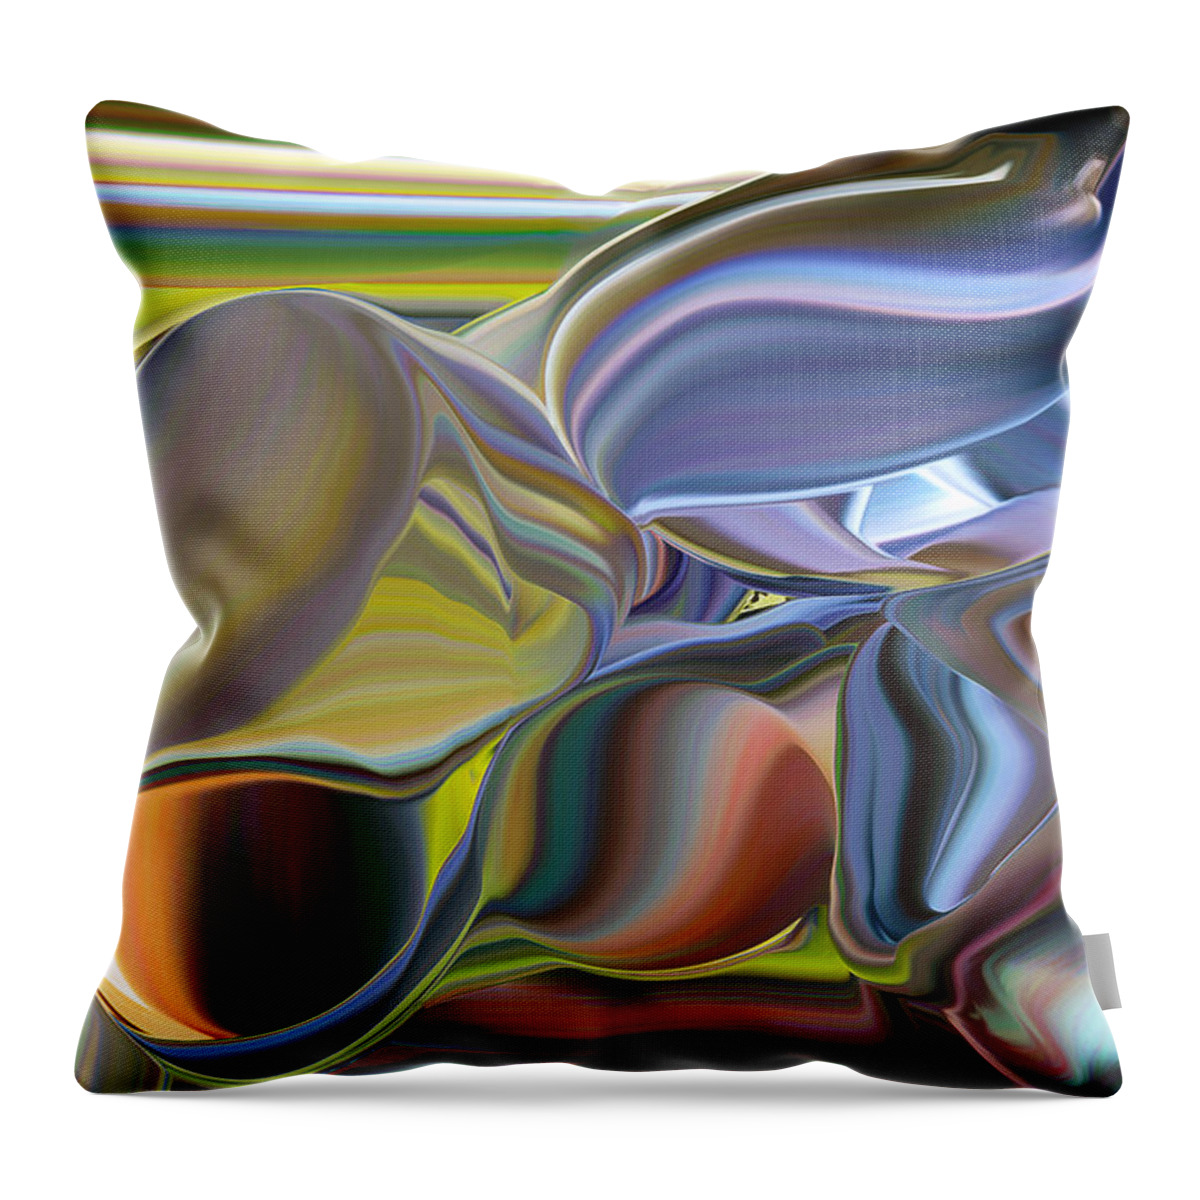 Original Modern Art Abstract Contemporary Vivid Colors Throw Pillow featuring the digital art Hightoned 1 by Phillip Mossbarger